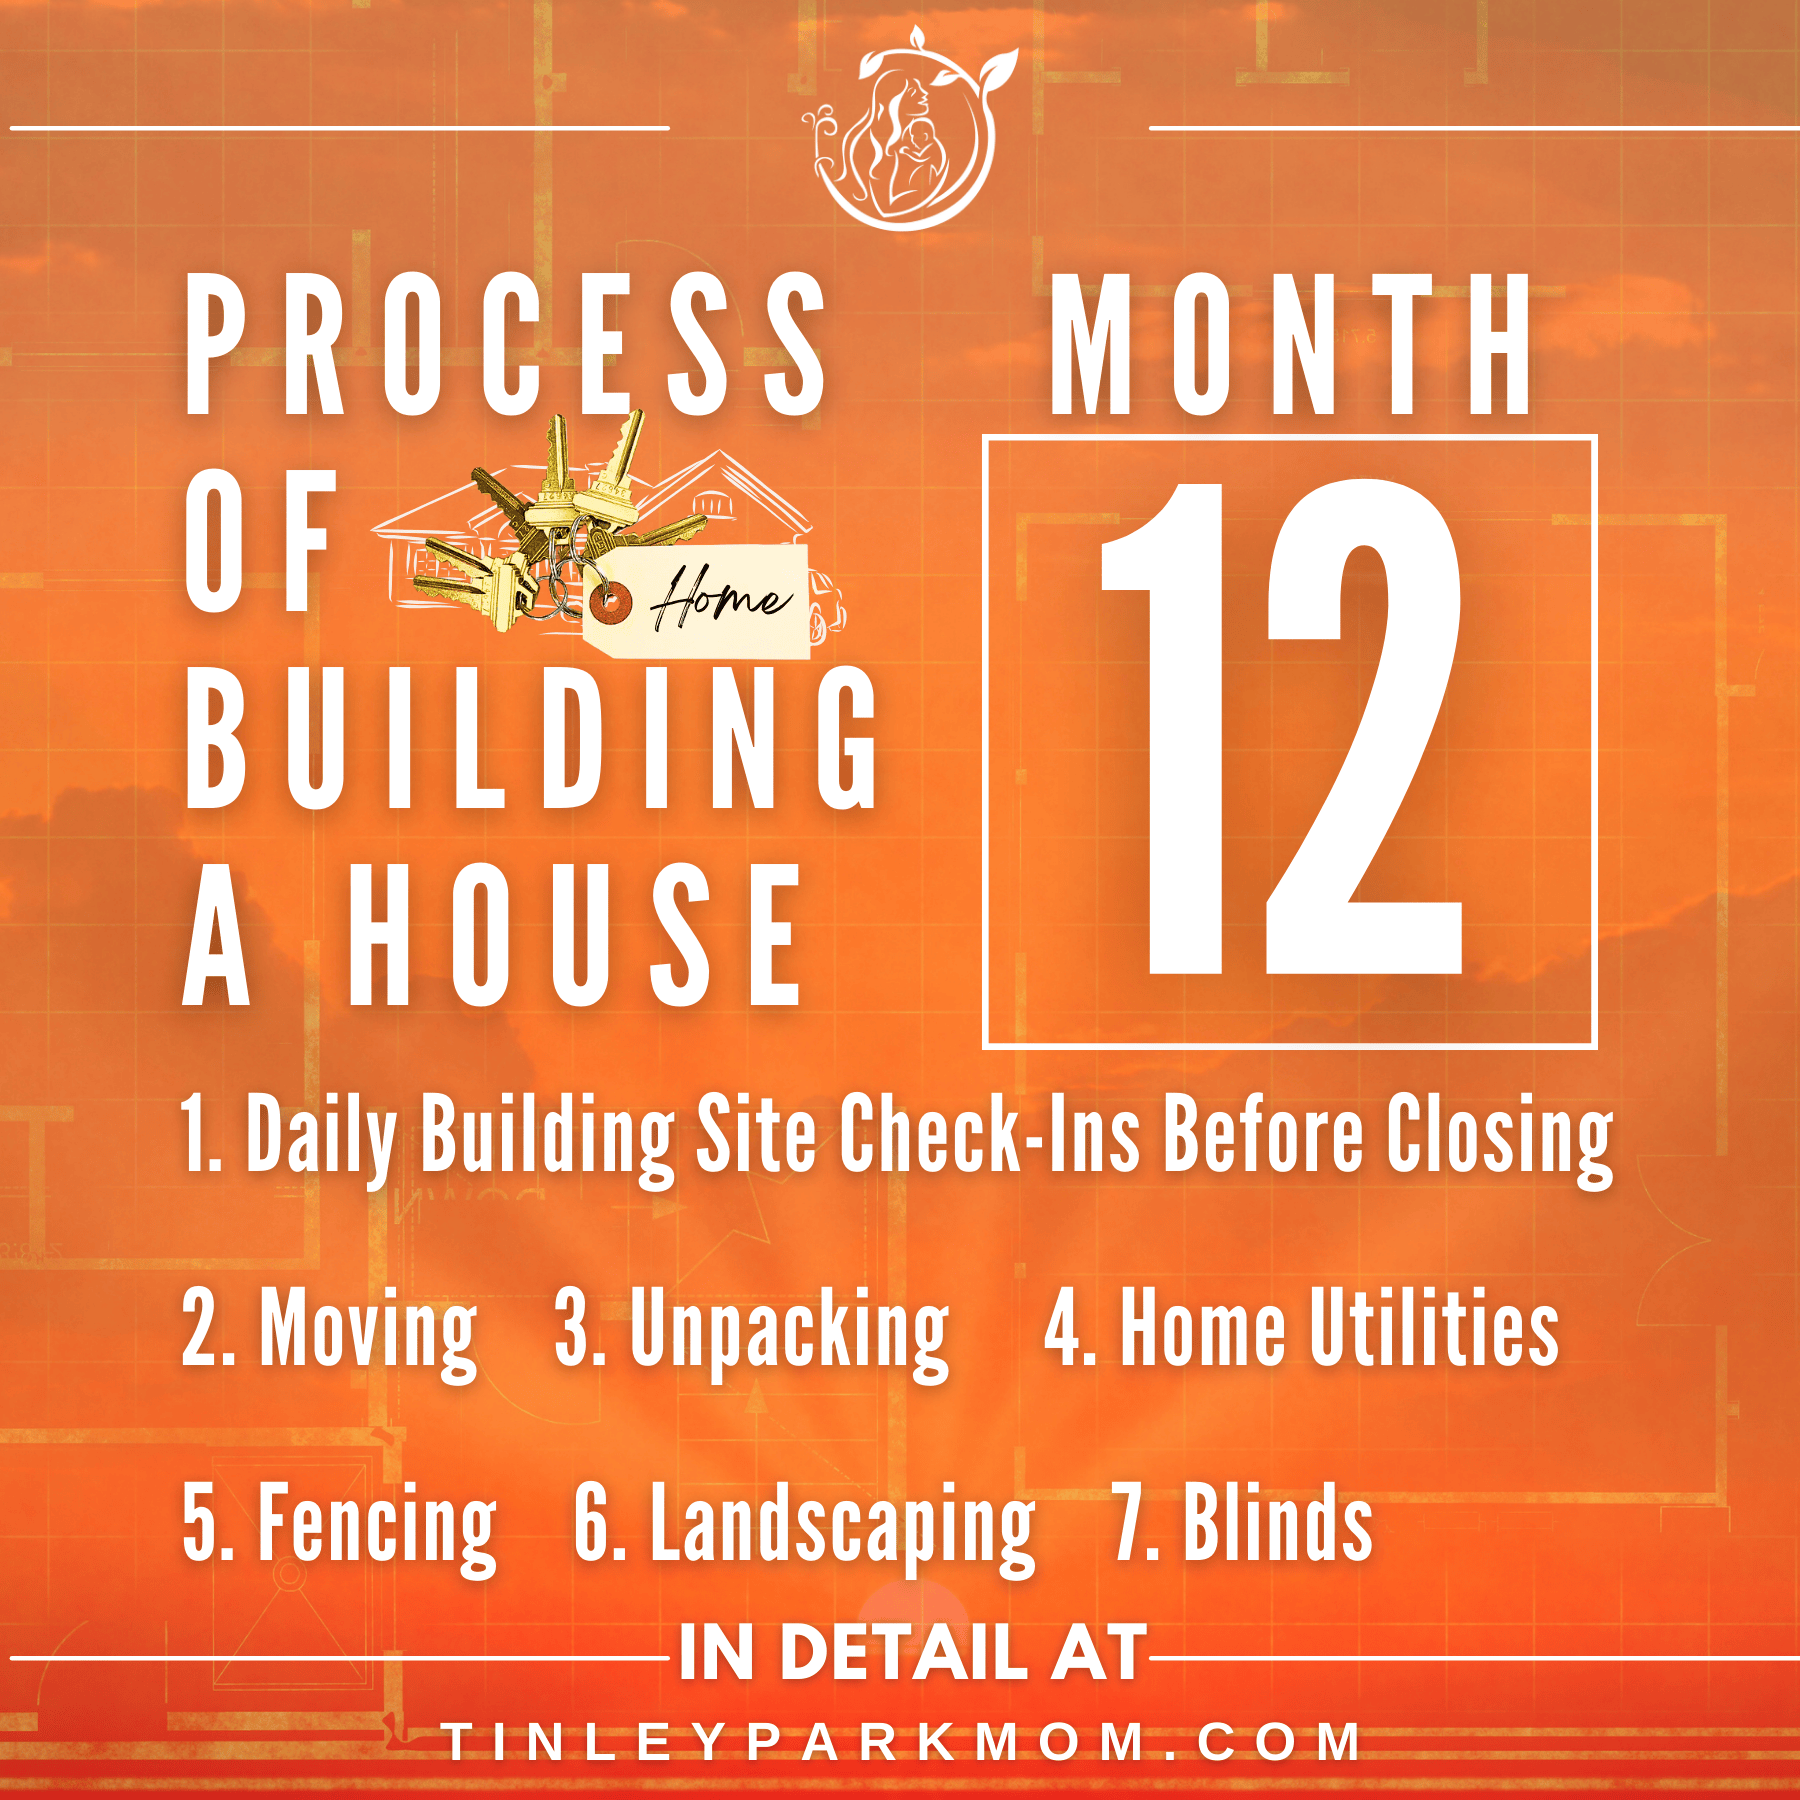 For you Pinterest users: PROCESS OF BUILDING A HOUSE Month 12 - Final Month - 1. Daily Building Site Check-Ins Before Closing 2. Moving 3. Unpacking 4. Home Utilities  5. Fencing 6. Landscaping 7. Blinds 